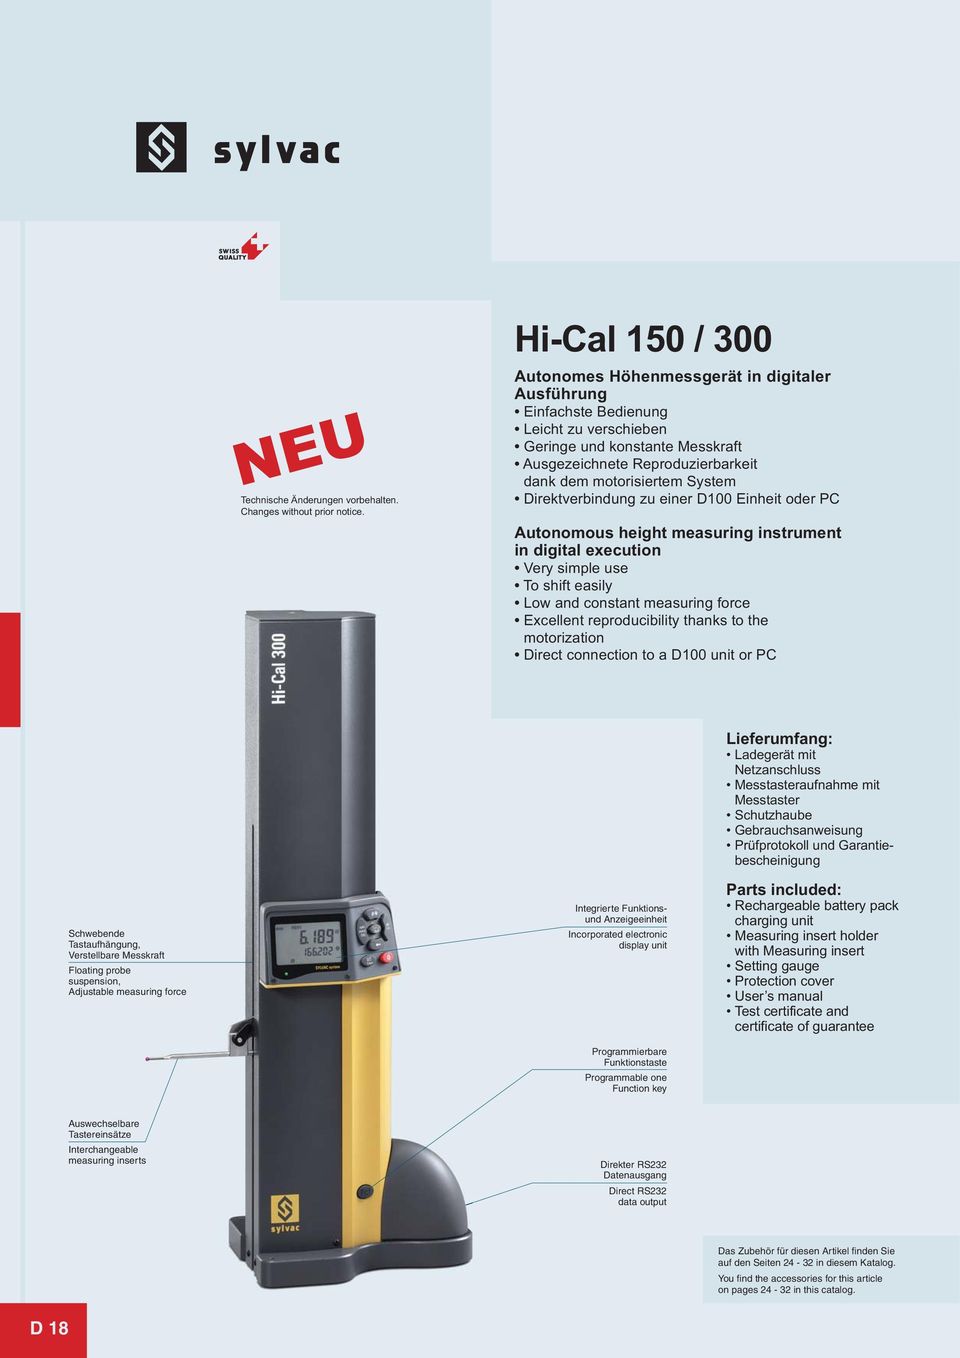 System Direktverbindung zu einer D100 Einheit oder PC Autonomous height measuring instrument in digital execution Very simple use To shift easily Low and constant measuring force Excellent